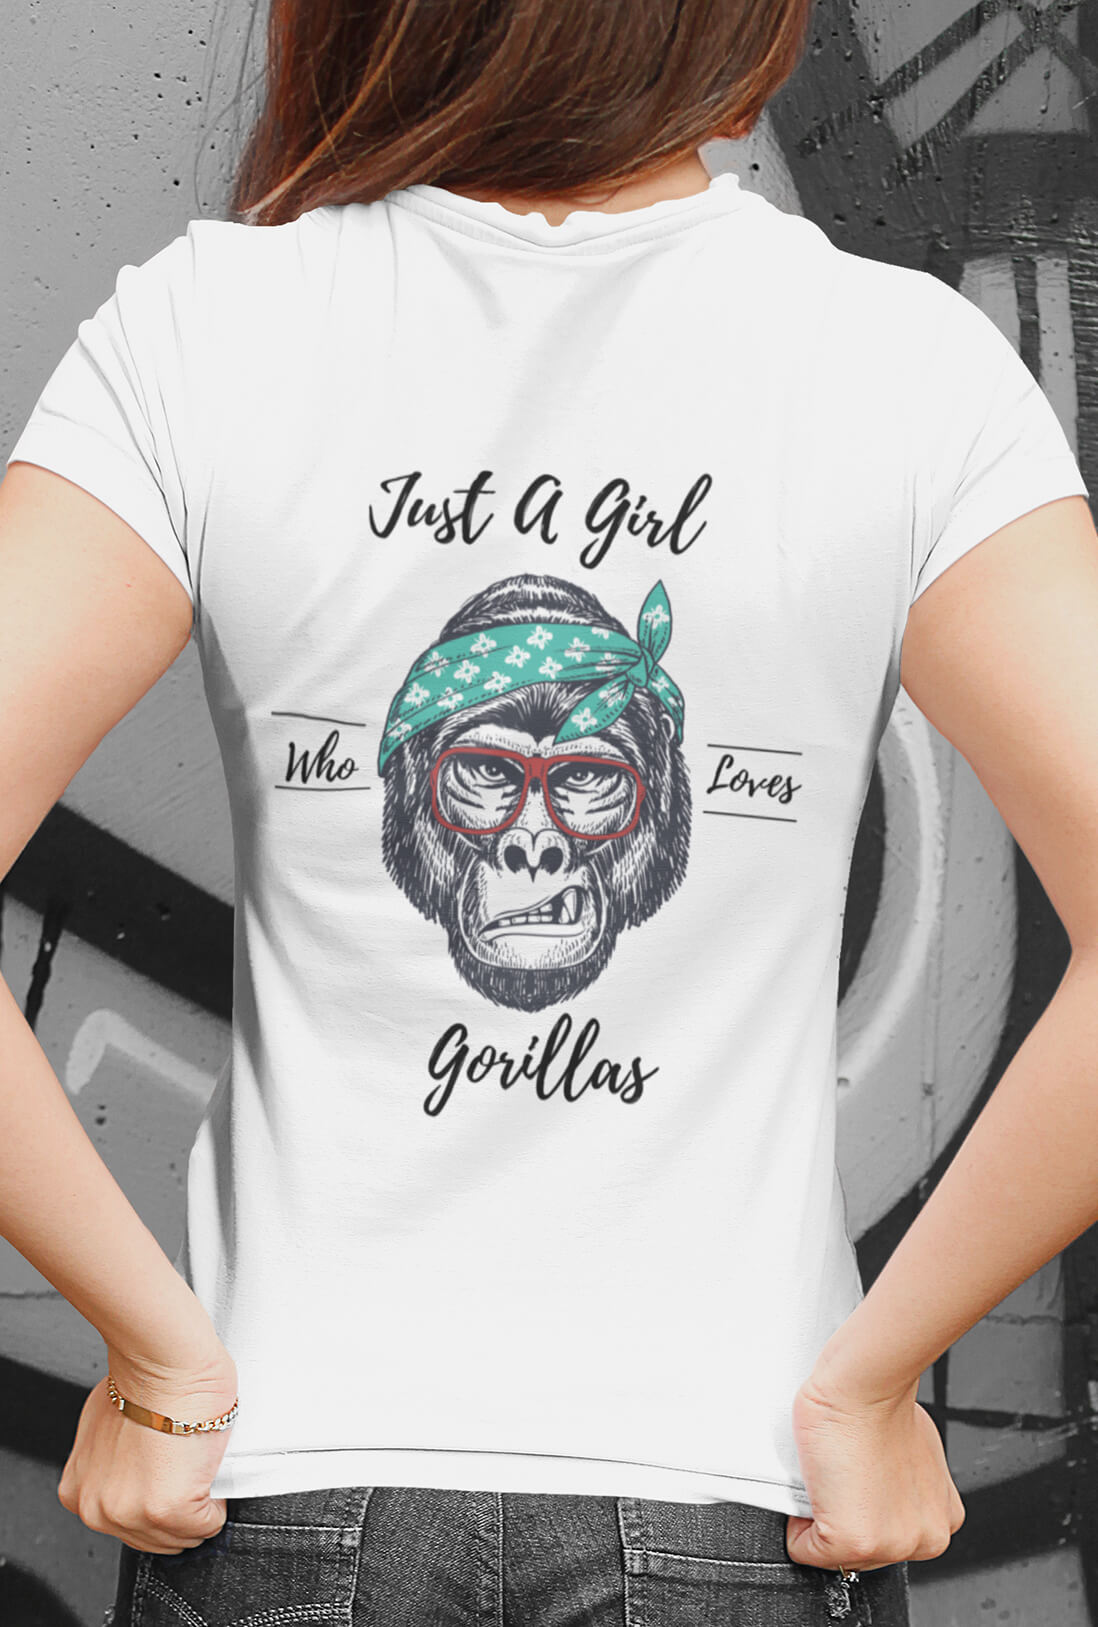 Just a Girl Women's Back Printed T-Shirt